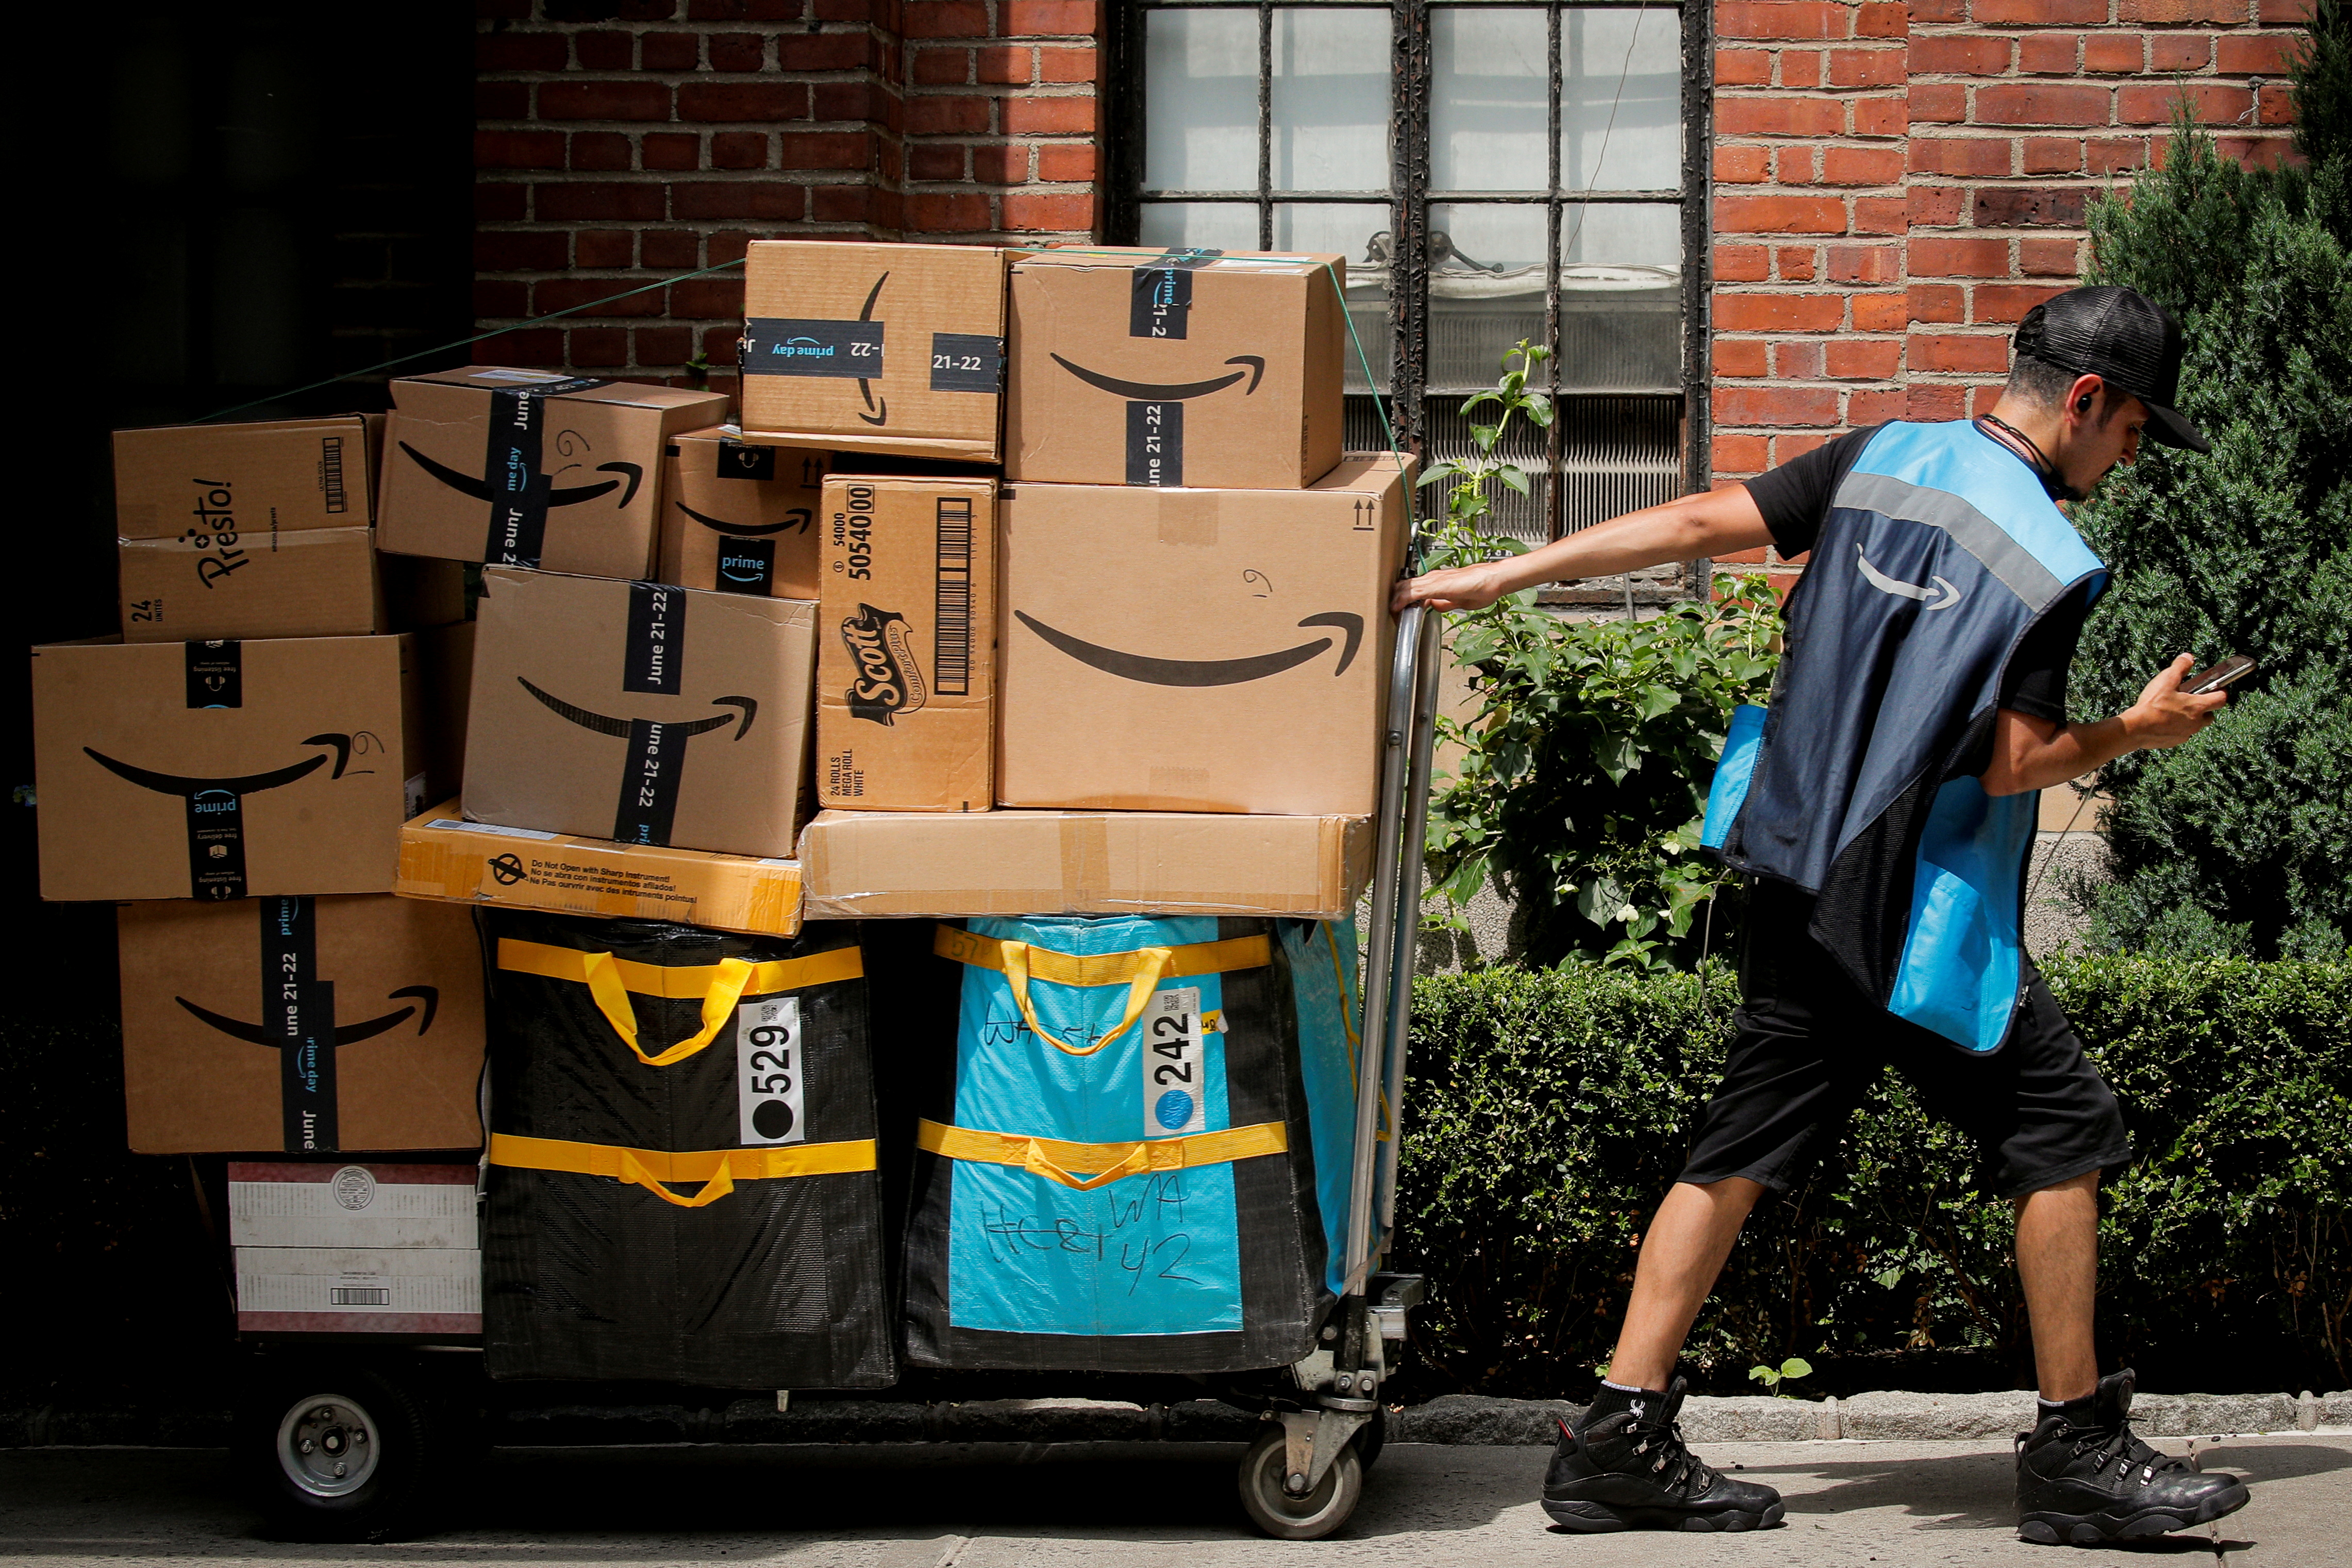 How to enable third-party shipping on amazon wish list